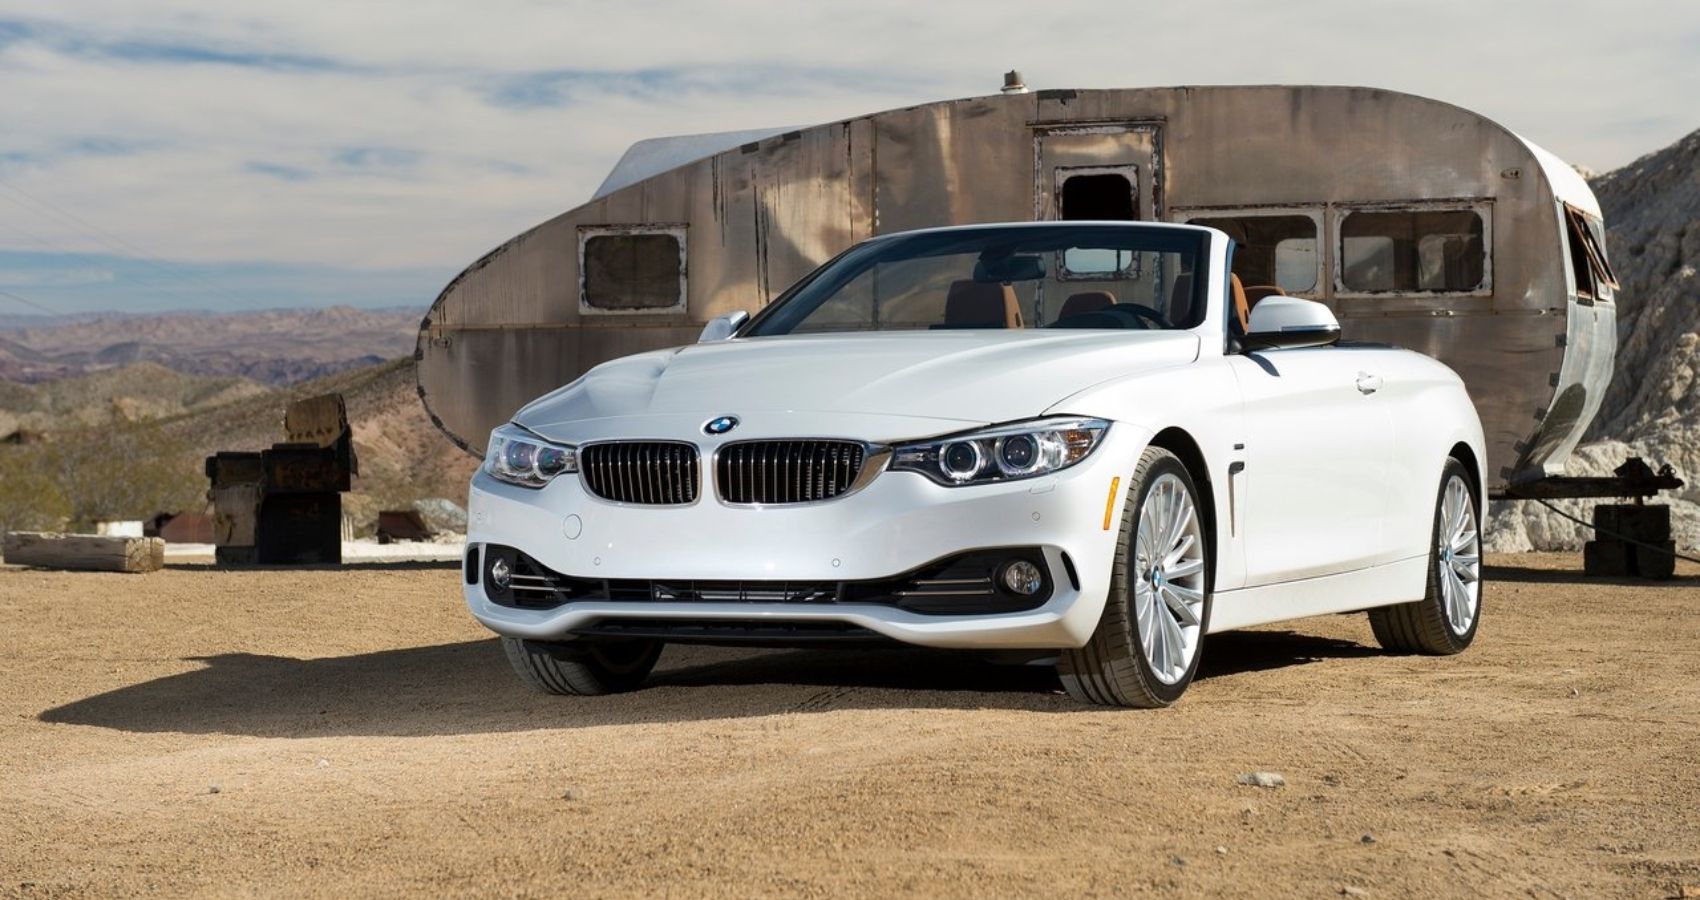 BMW 4-Series Convertible (2014) - Front Angle